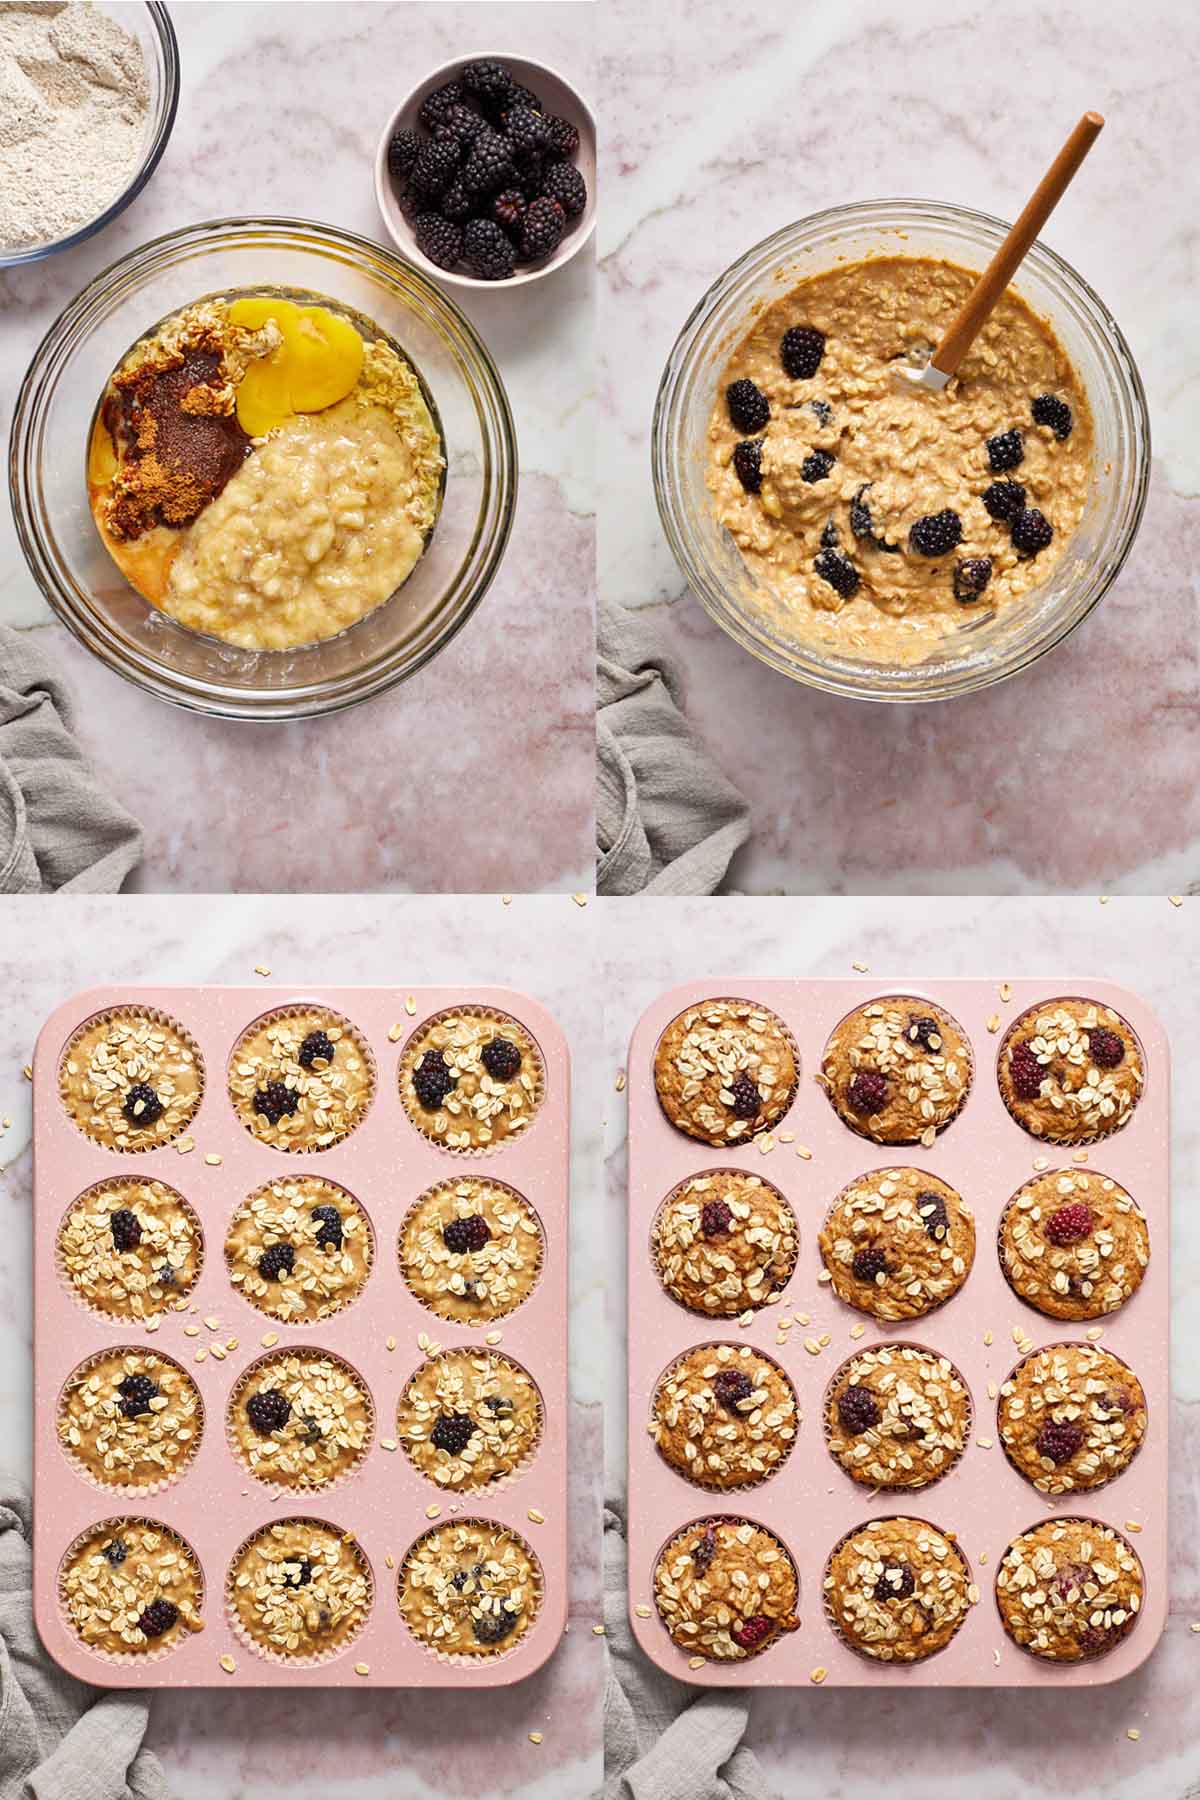 Collage of 4 images showing how the muffin batter is made and the muffins baked up in a pan.